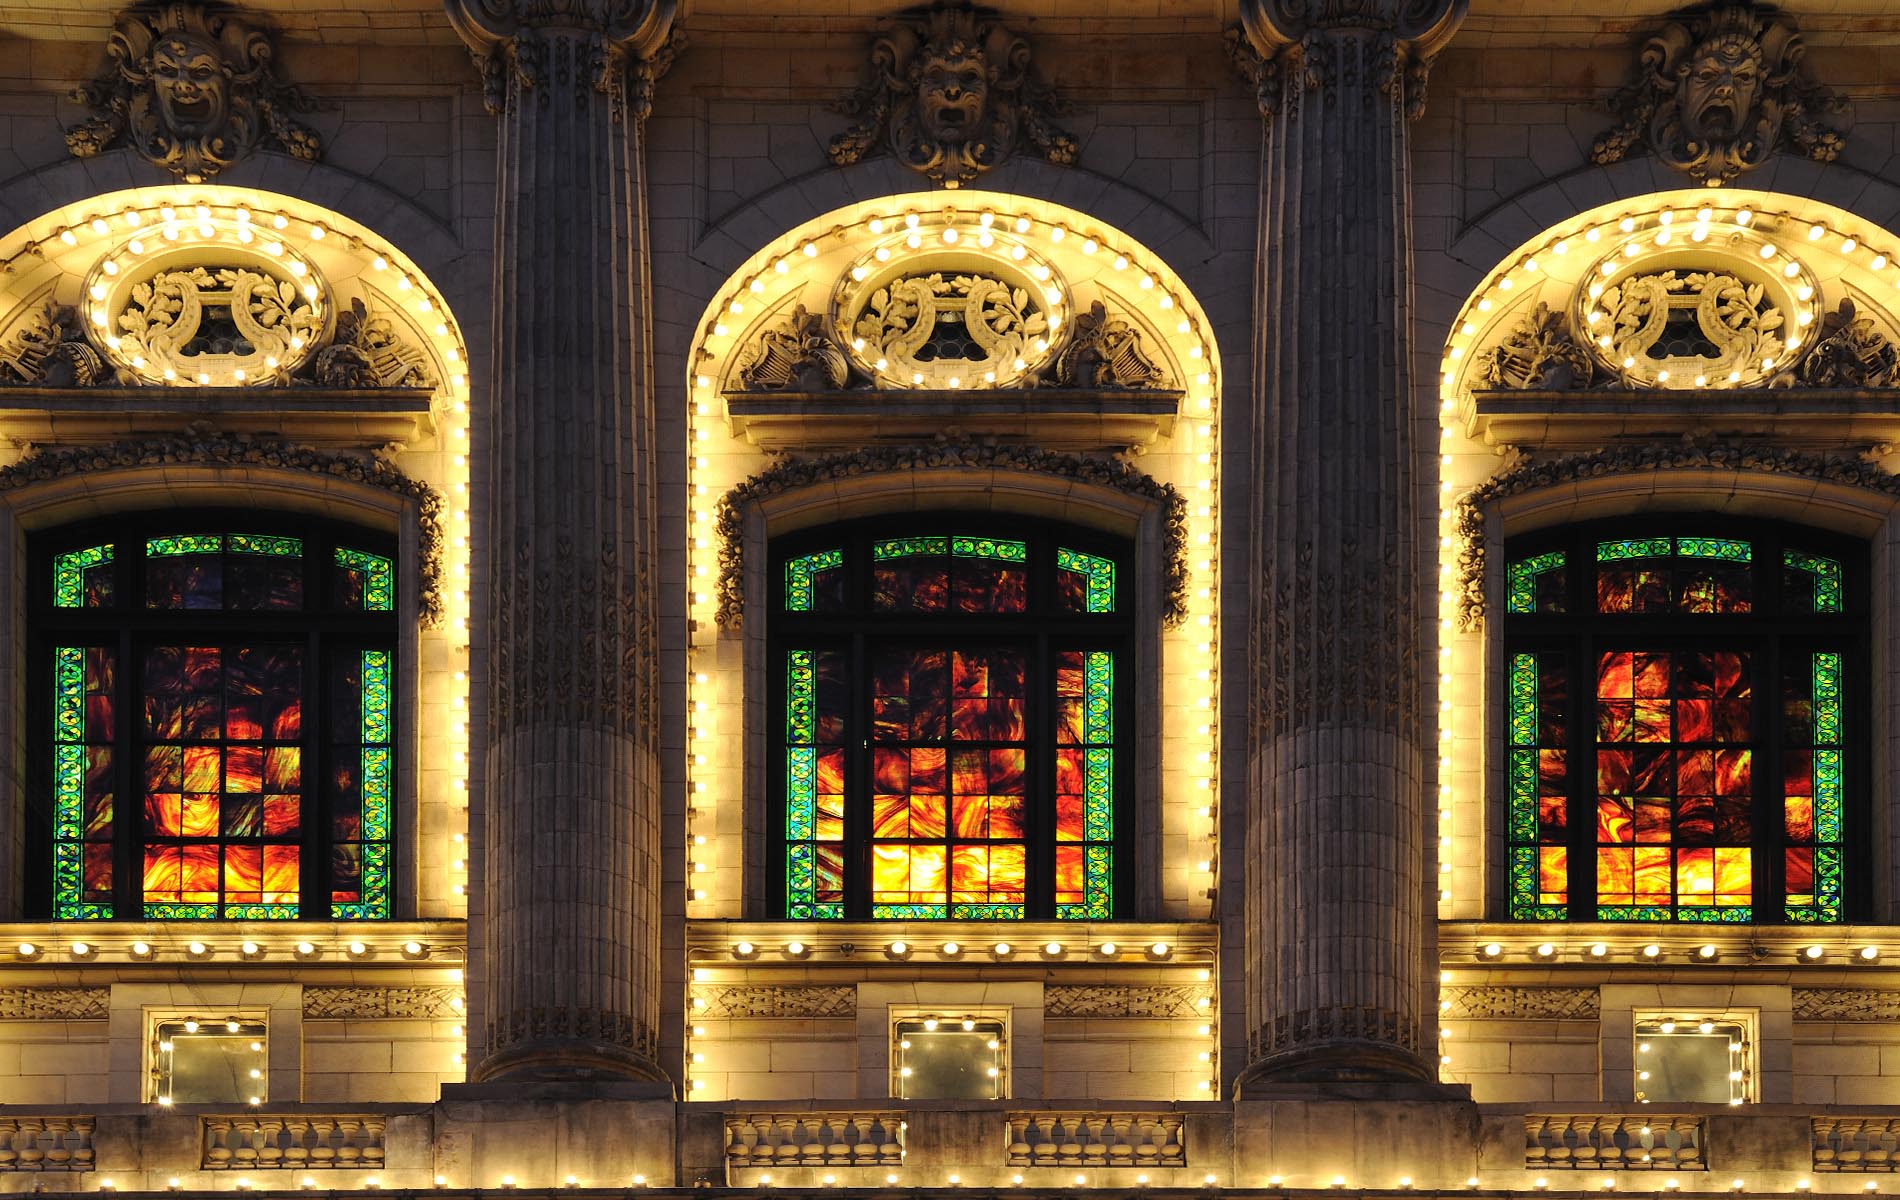 Three illuminated windows with stain glass red green and yellow a panels on ornate building